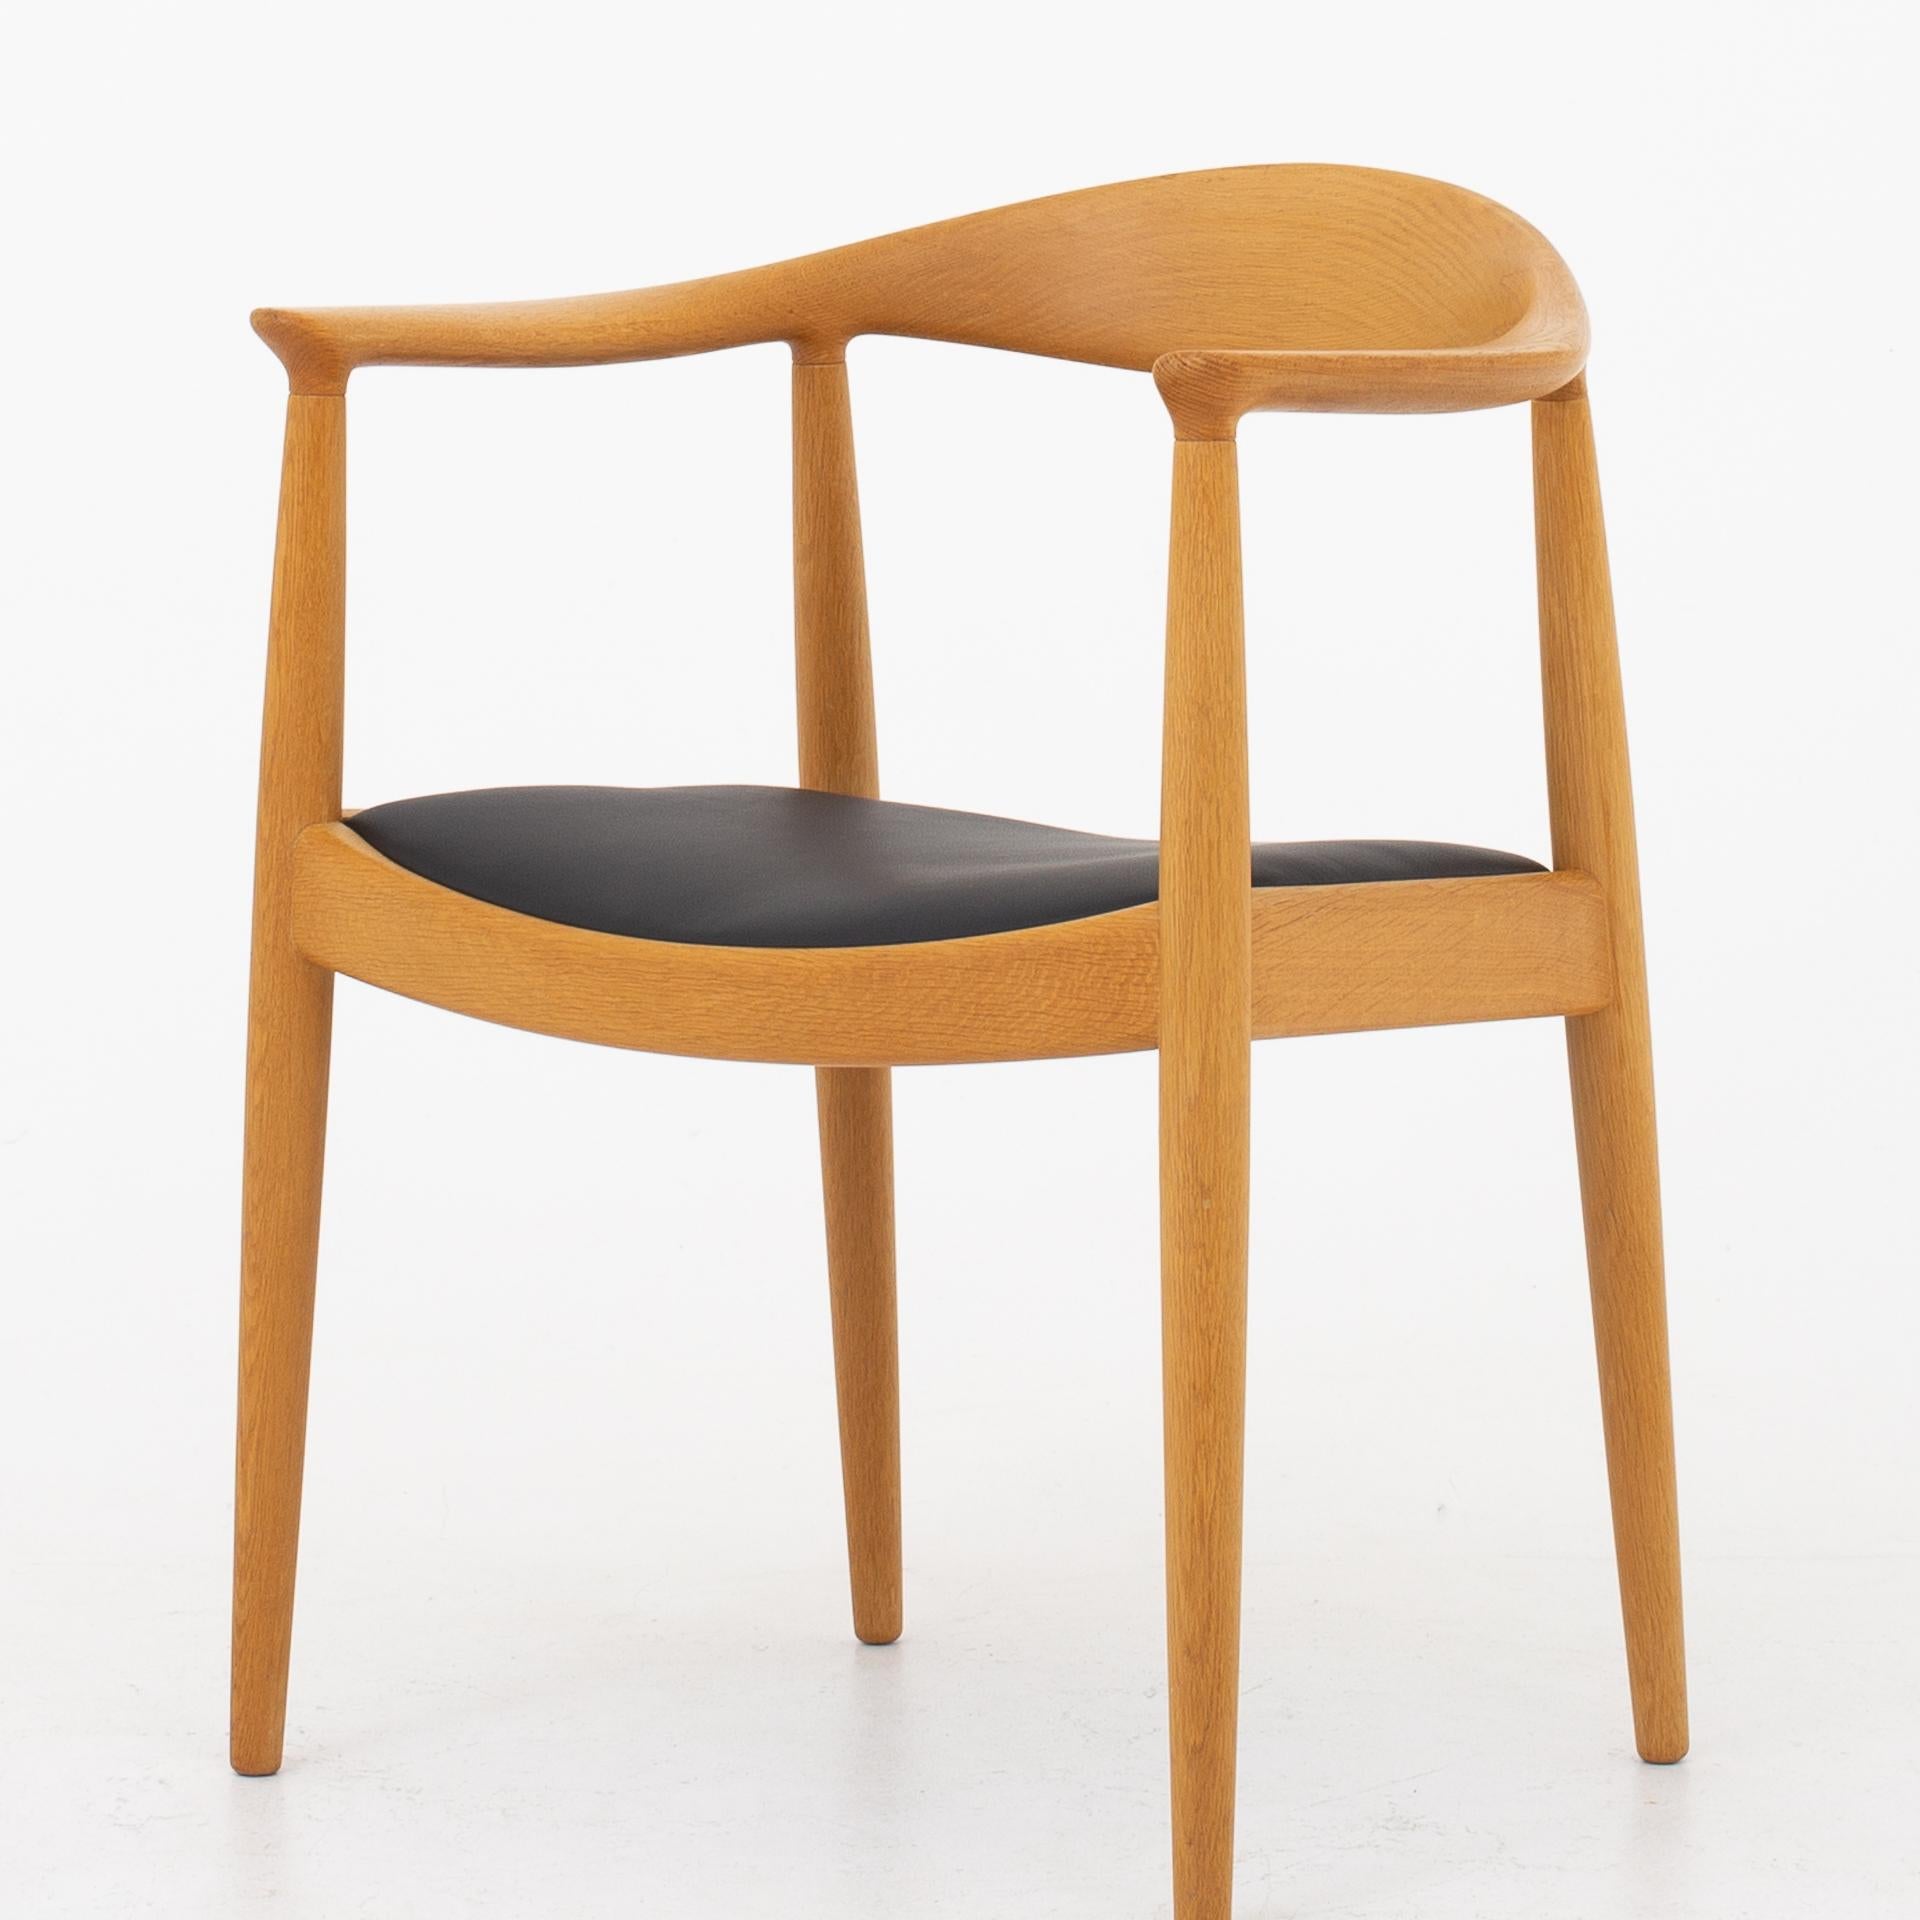 Set of 8 JH 503, the chair in lacquered oak with seat in black leather. Maker Johannes Hansen.